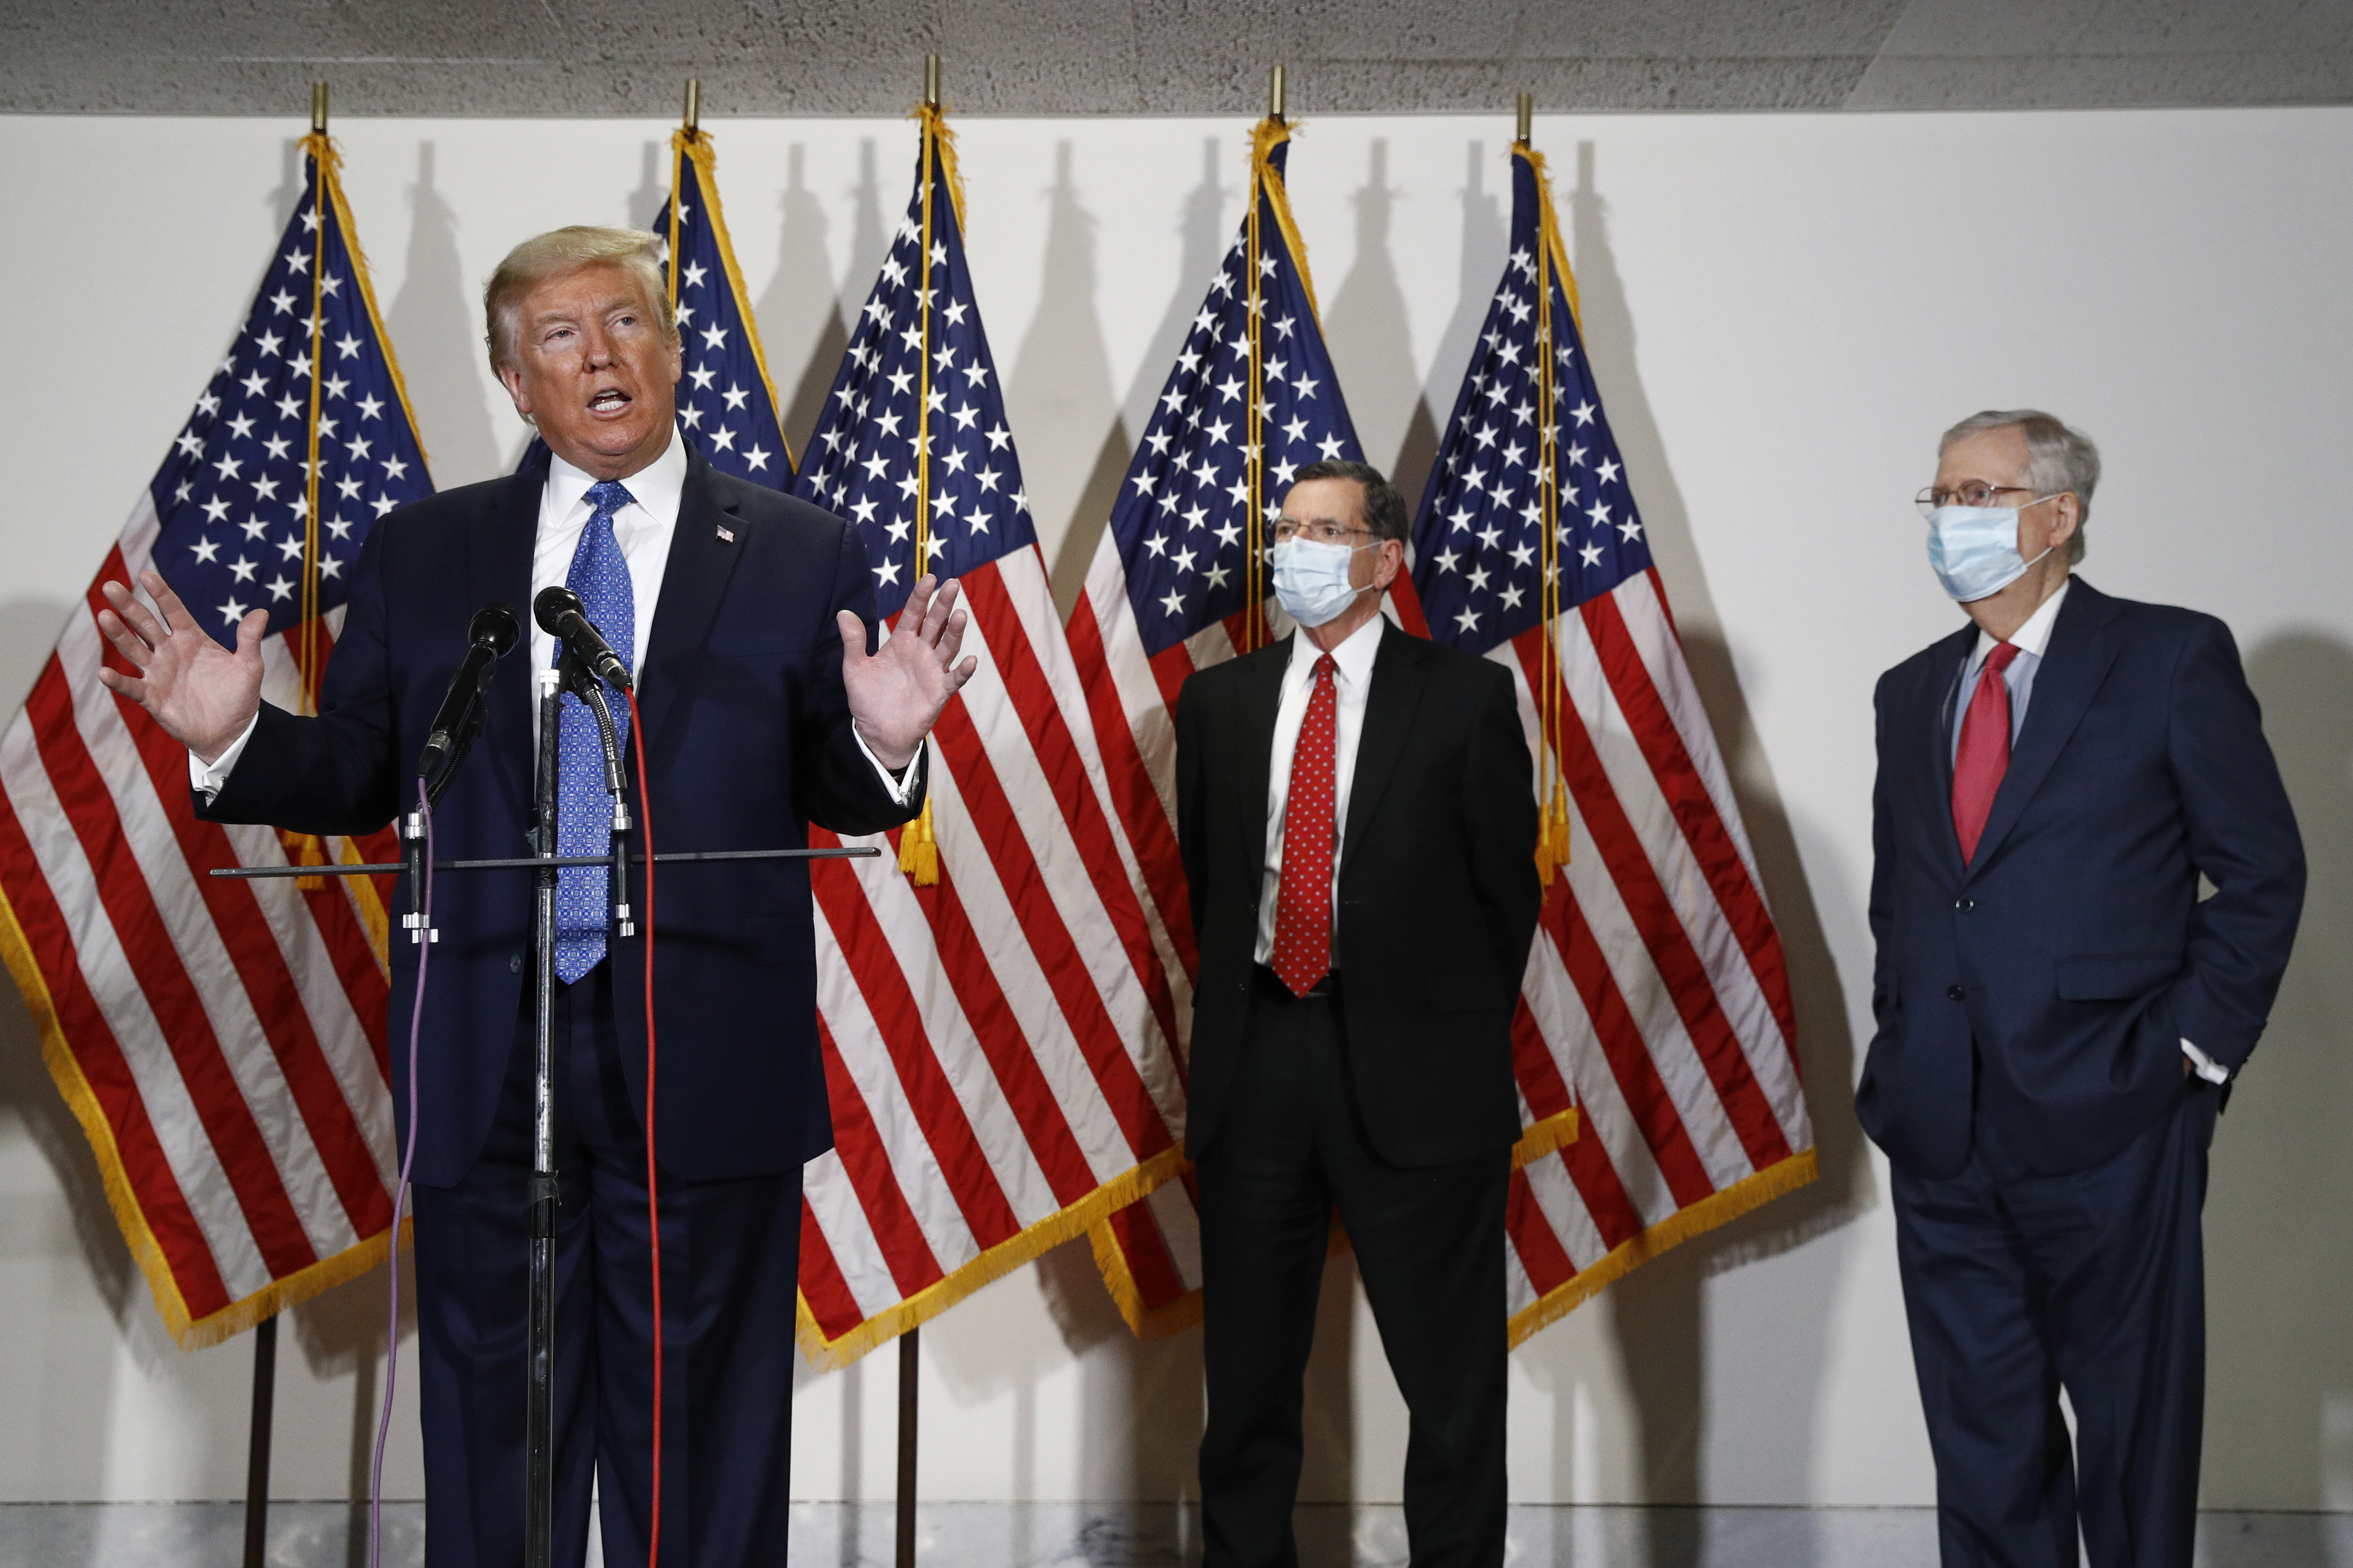 President Donald Trump speaks with reporters after meeting with Senate Republicans at their weekly luncheon on Capitol Hill in Washington, Tuesday, May 19, 2020. Standing behind Trump are Sen. John Barrasso, R-Wyo., second from right, and Senate Majority Leader Mitch McConnell of Ky. (AP Photo/Patrick Semansky)